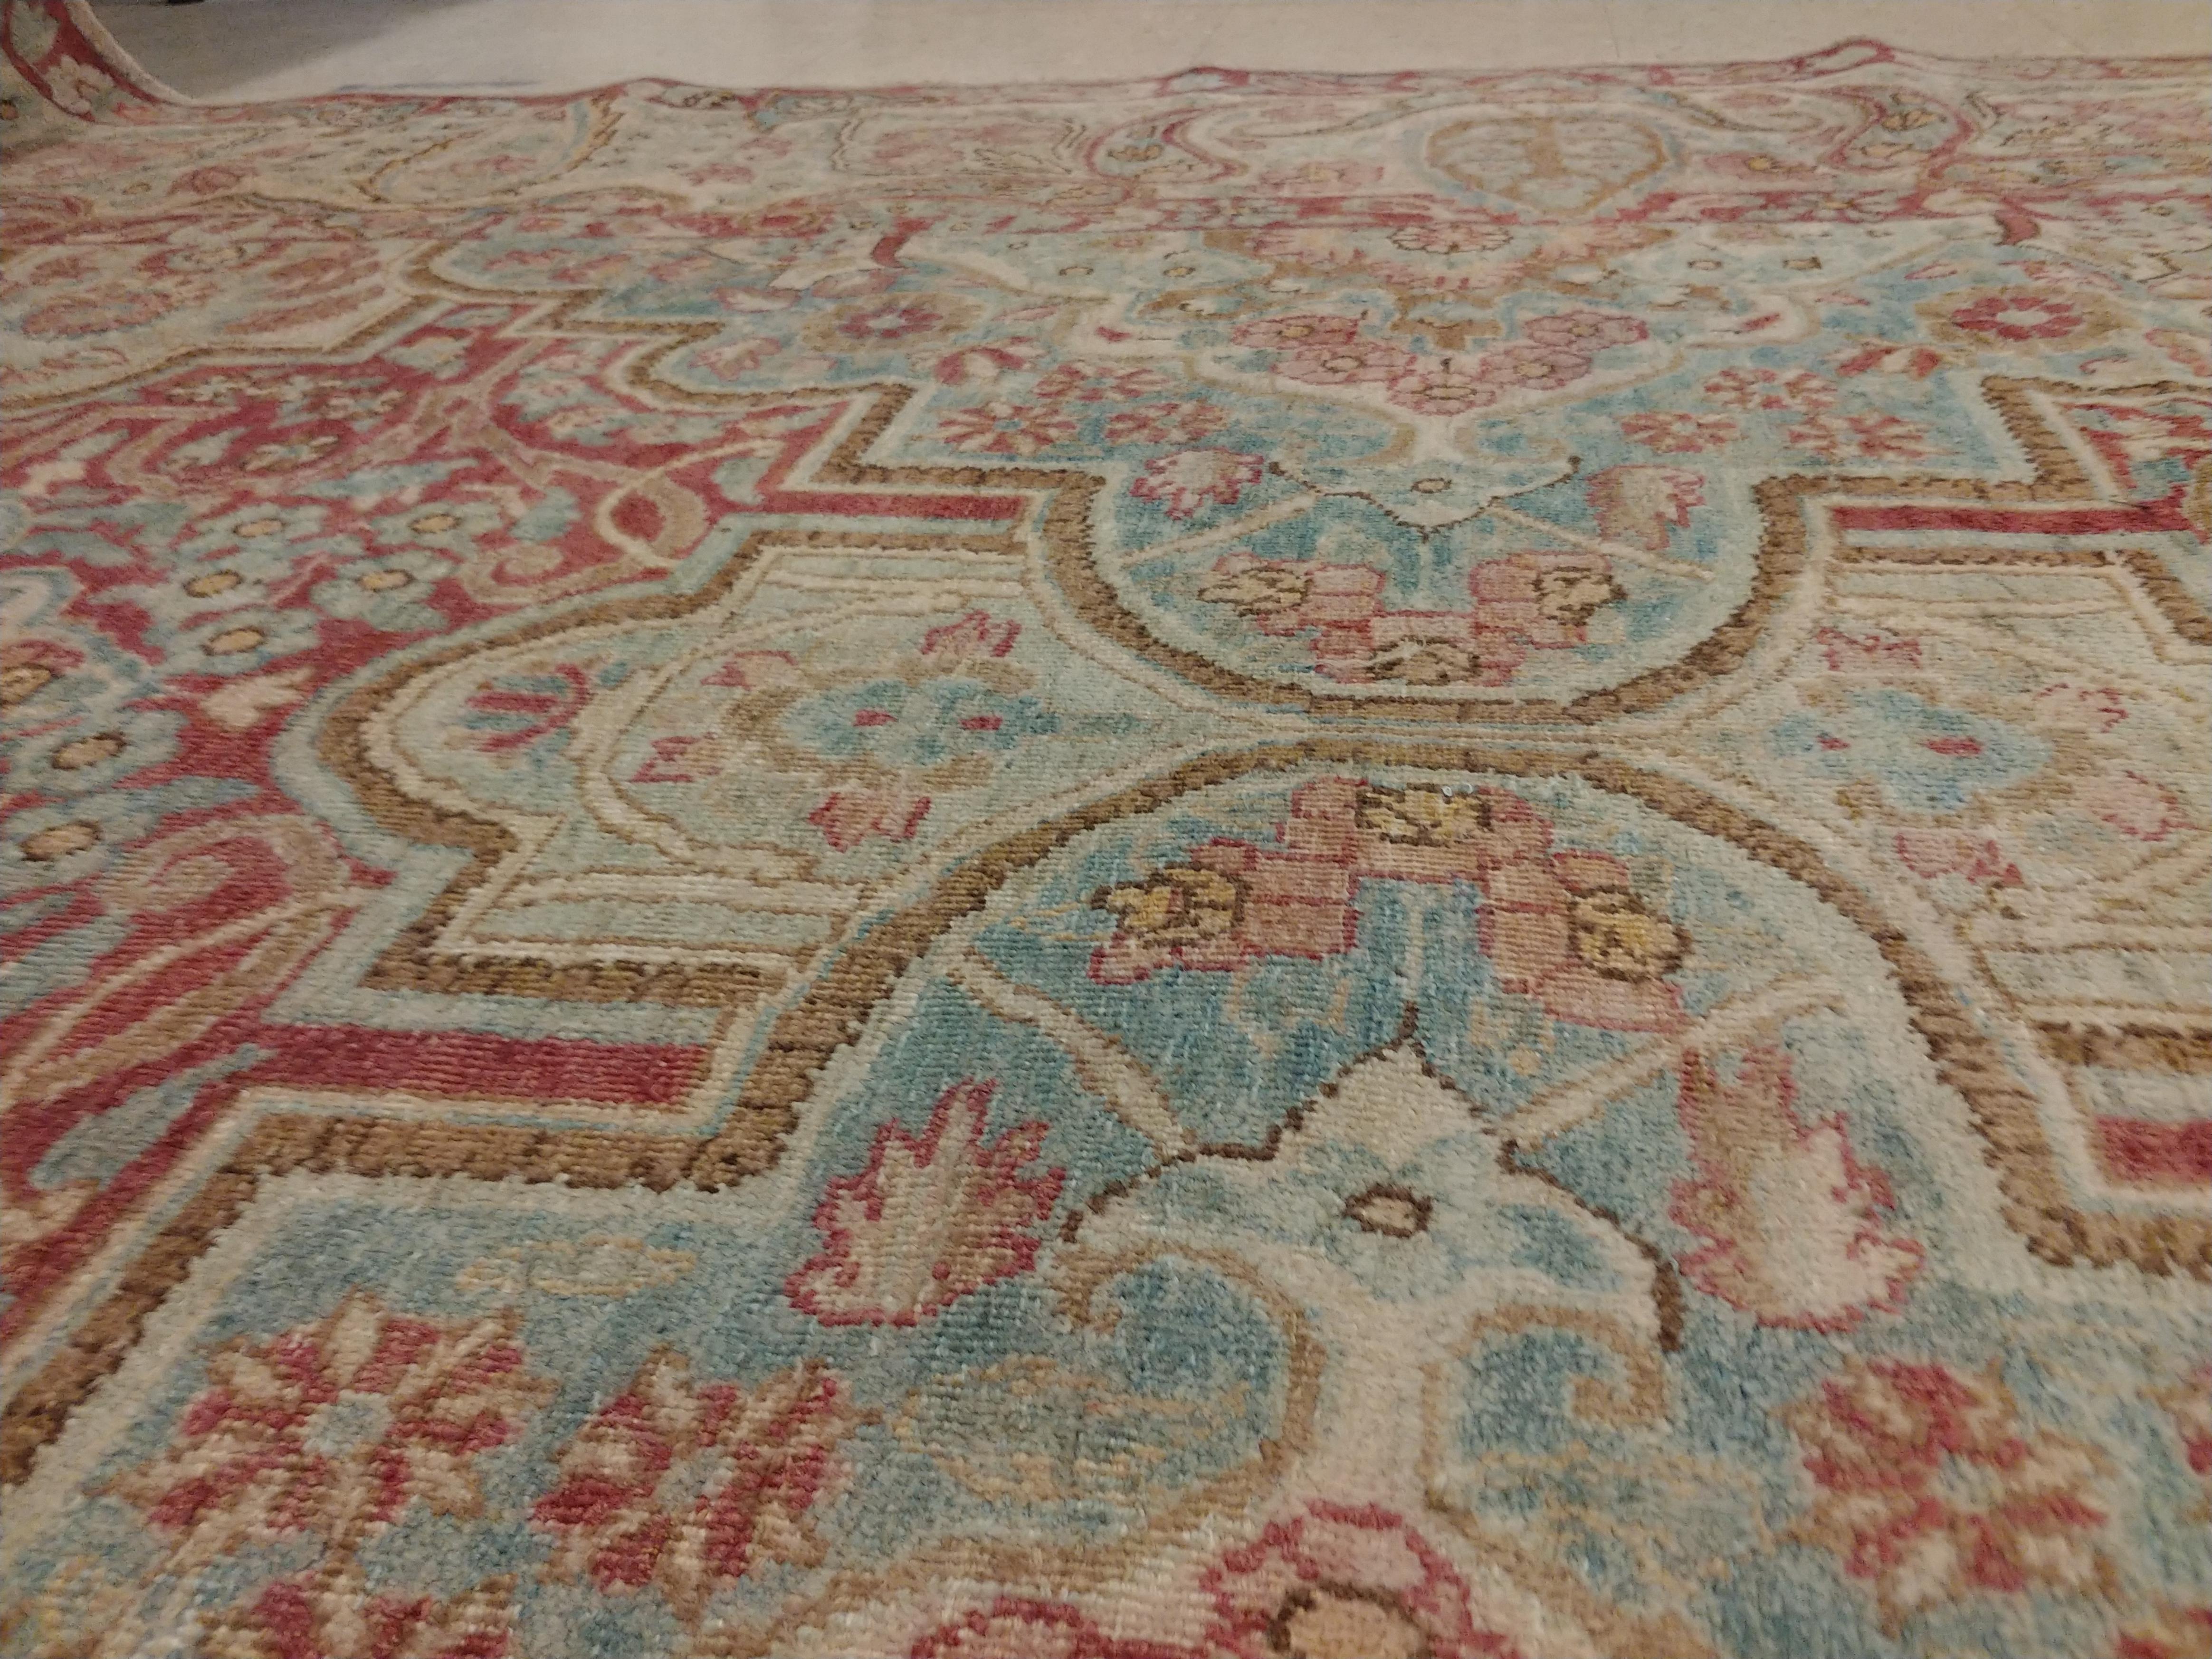 This master crafted Persian Kerman carpet exemplifies the profound understanding of the artistic principles of balance and harmony that make art-level antique rugs so inspiring to live with. Indicative of the best classical Persian carpets of its